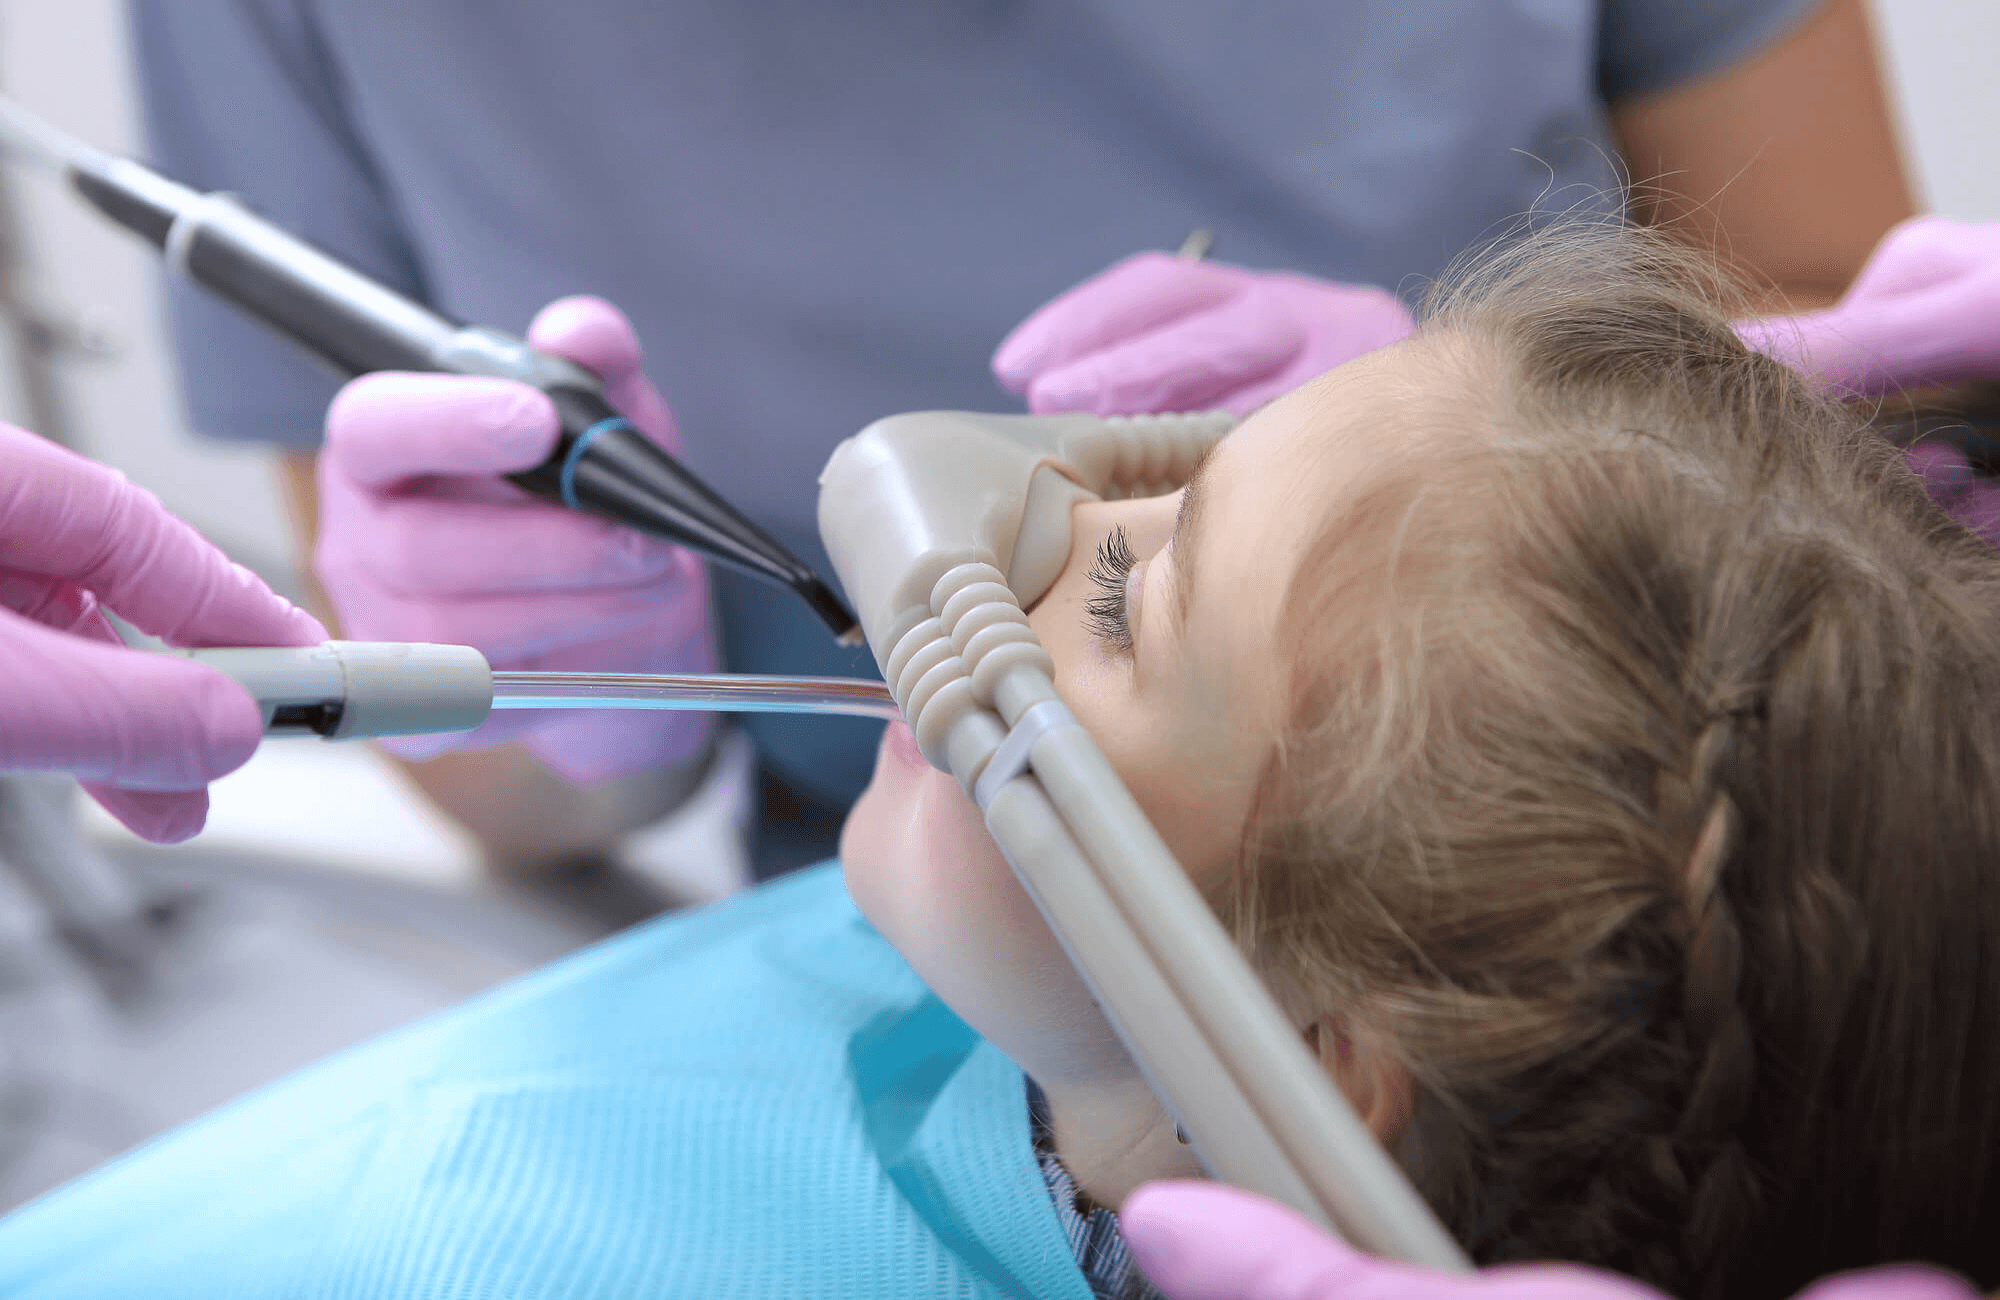 Should I Be Worried About Sedation Dentistry?